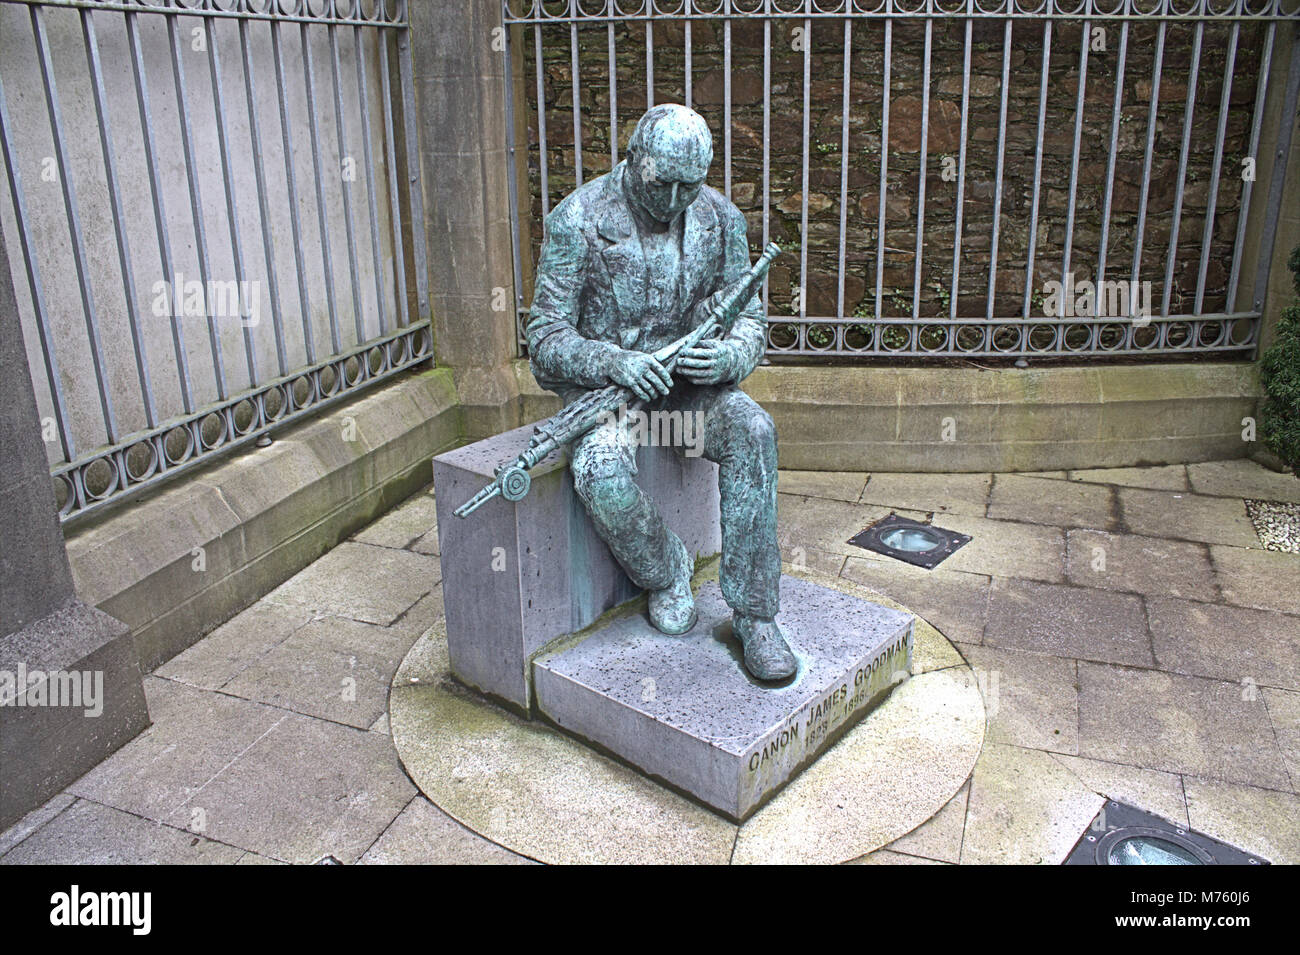 Bronze statue of Cannon Goodman, who was famous in West Cork and Ireland for collecting writing and playing old irish tunes and melodies. Stock Photo